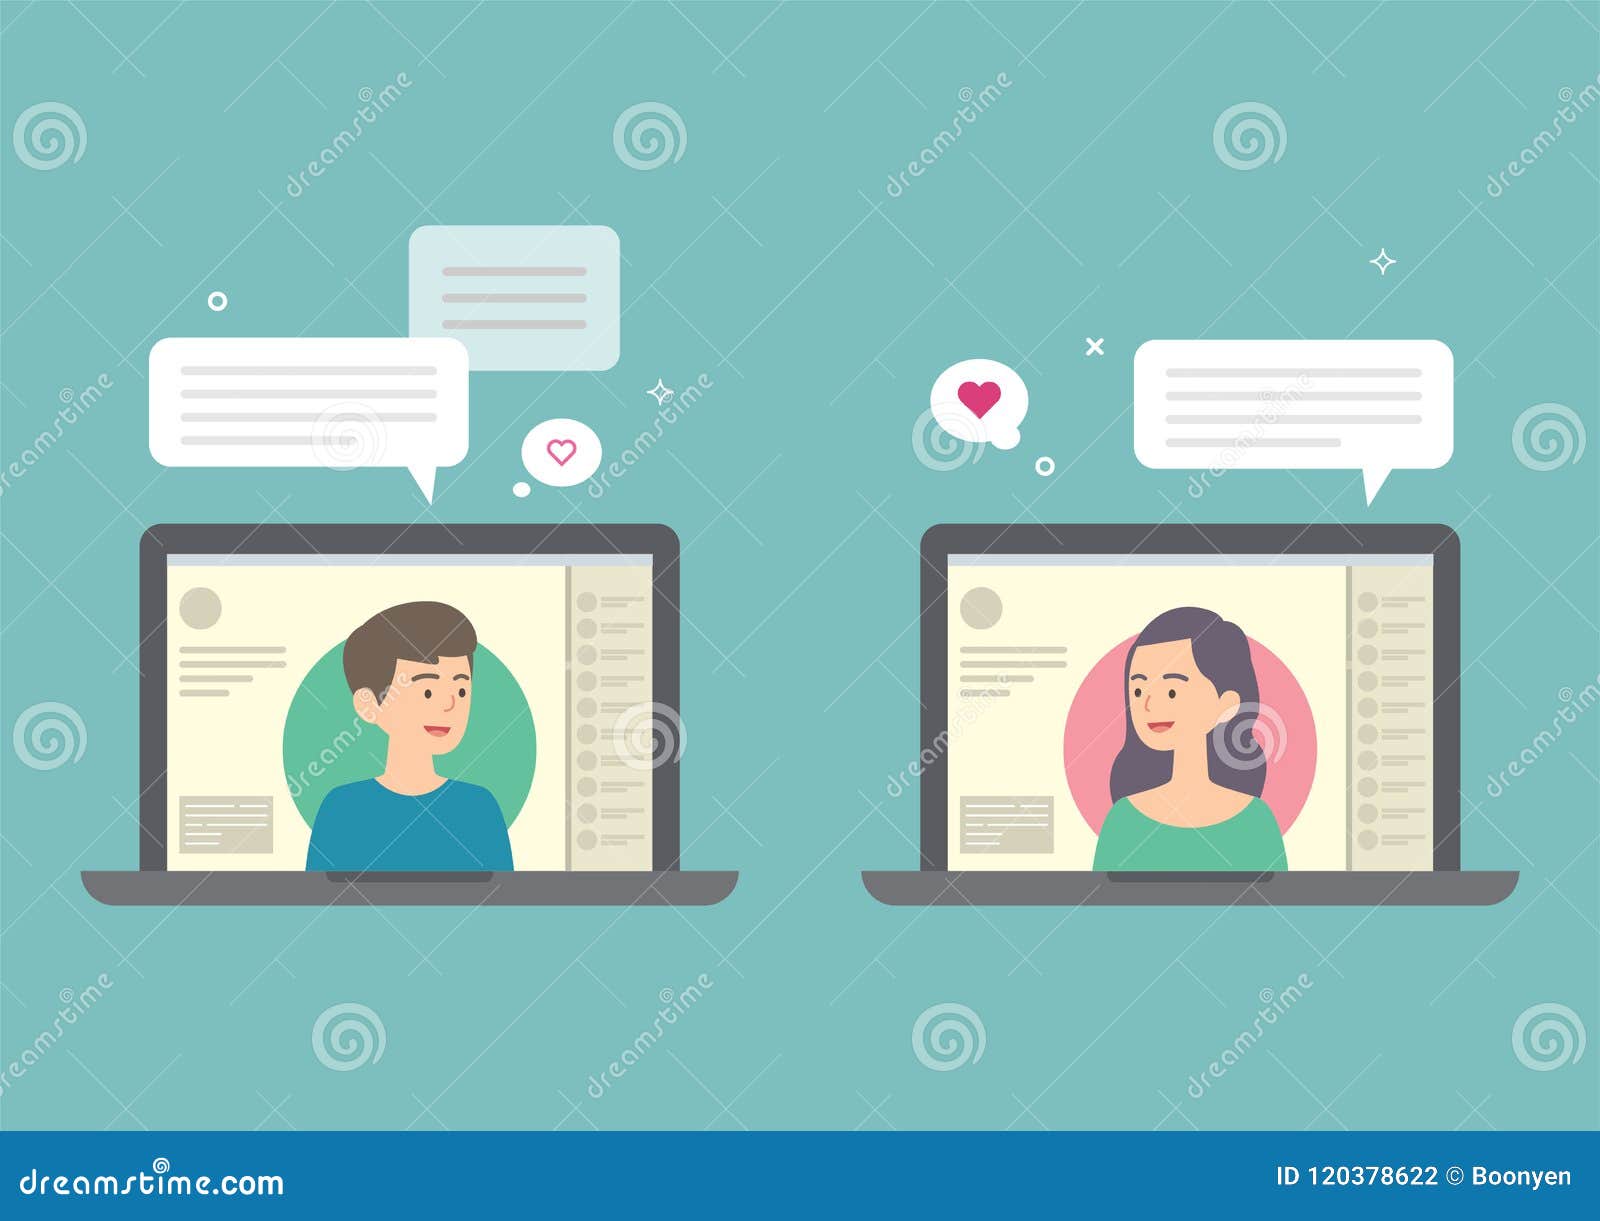 chatting online its mean dating